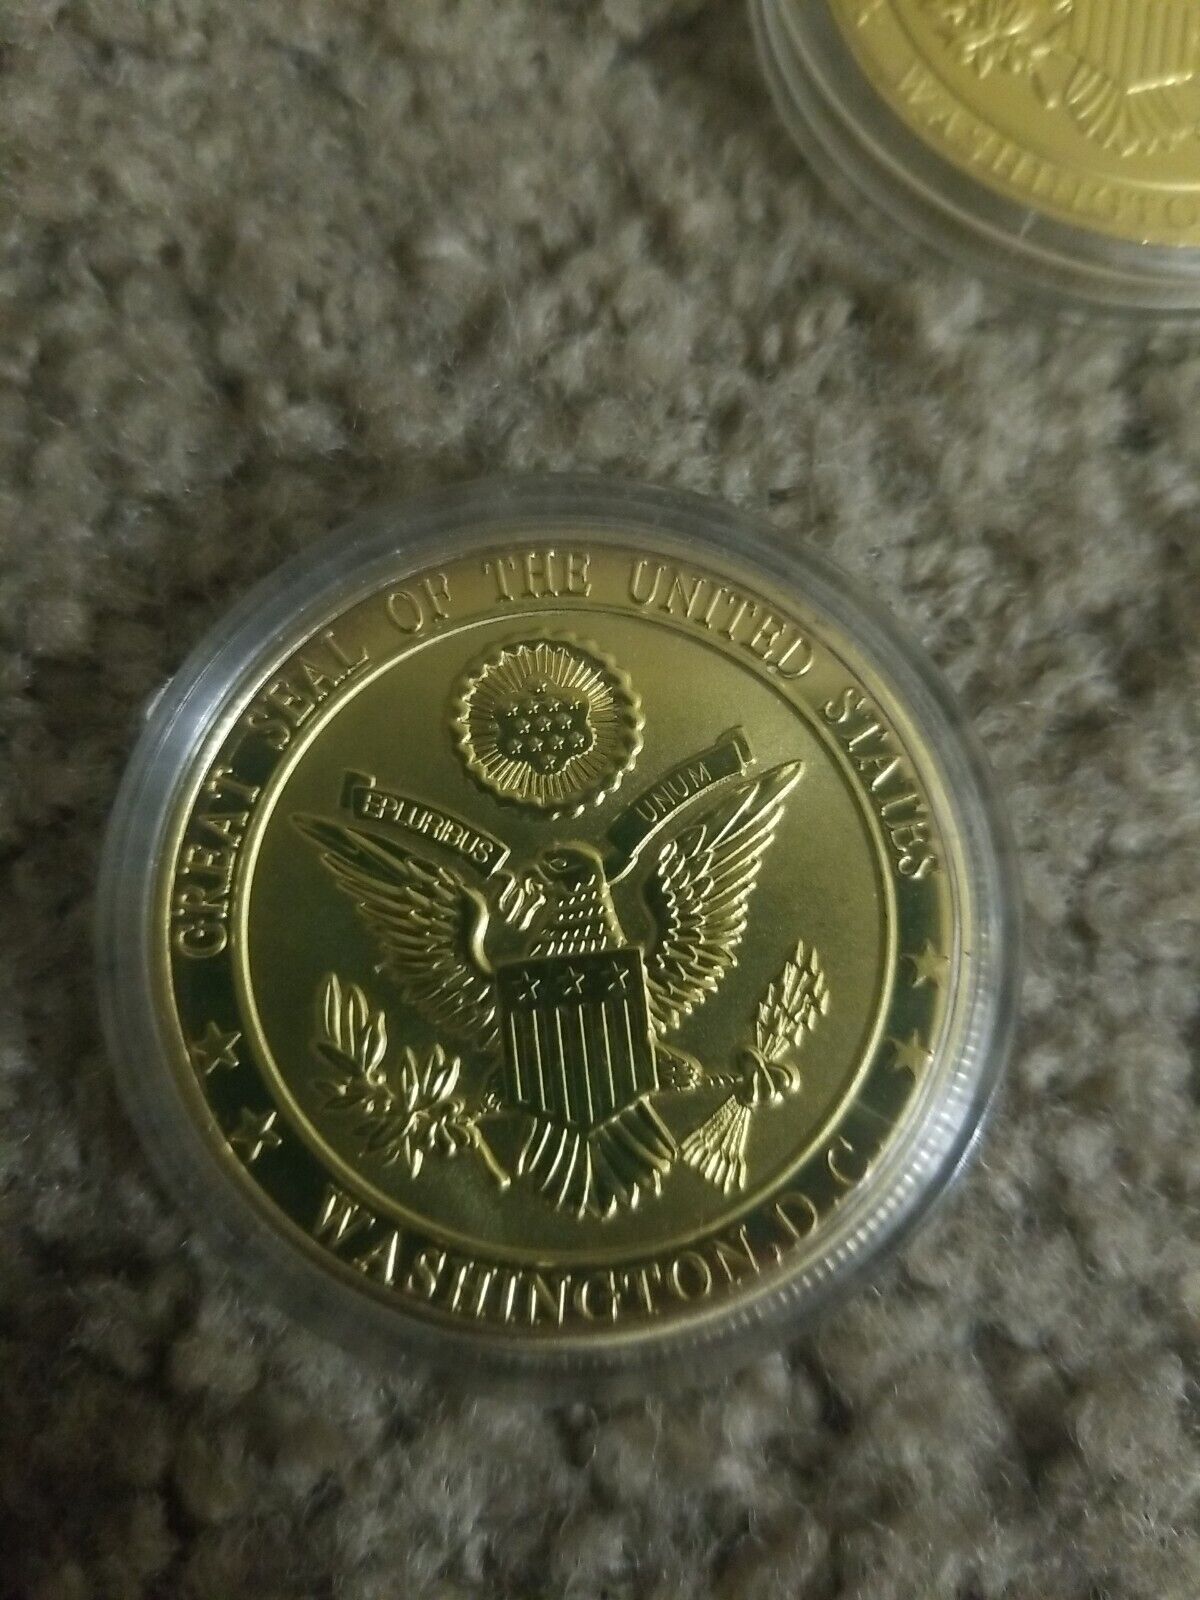 WASHINGTON, D.C. GOLD PLATED COIN 22KT GOLD 1.50